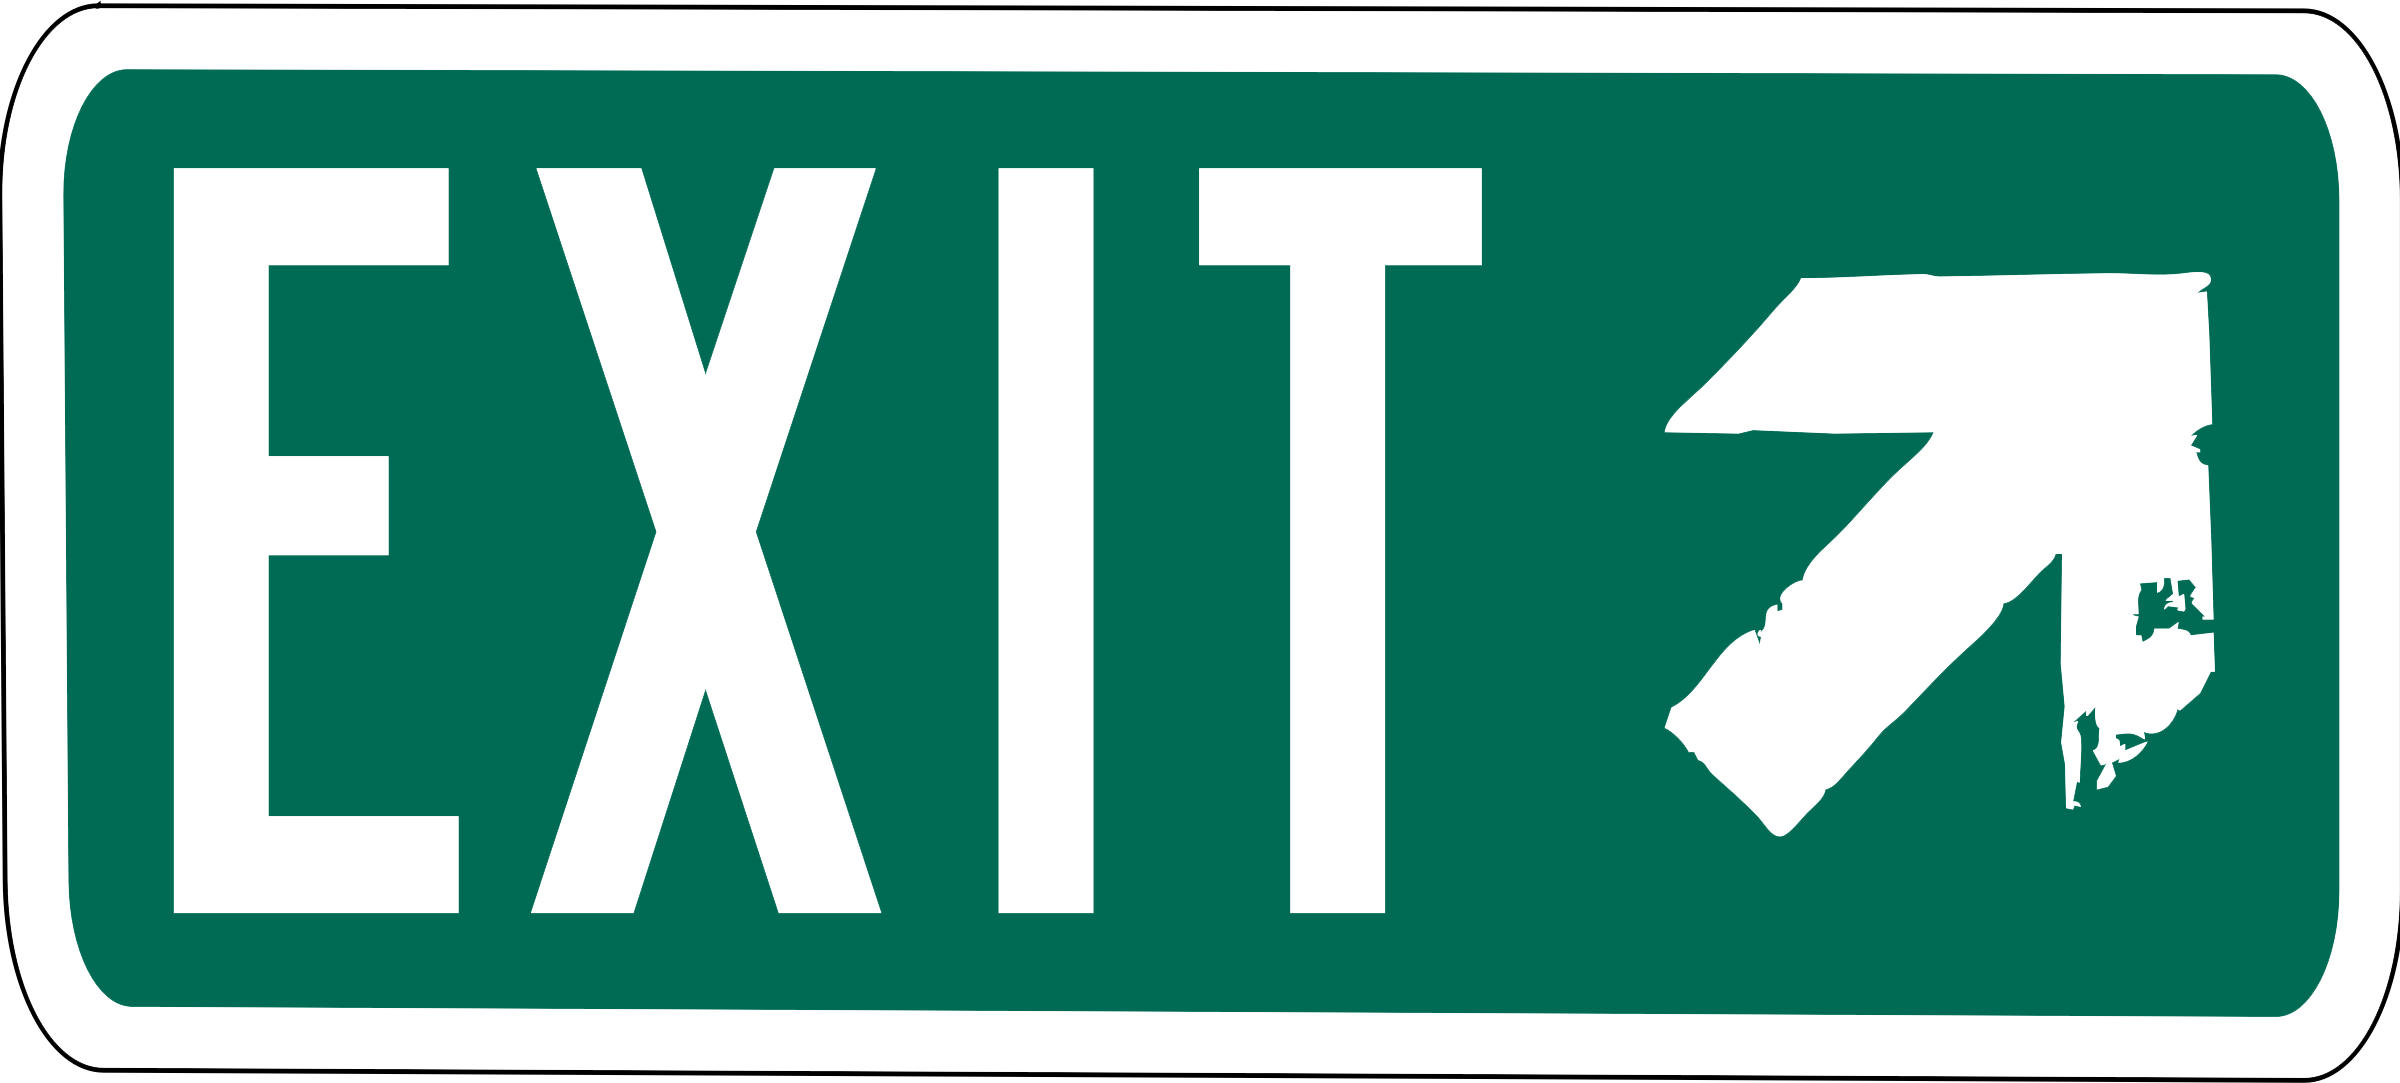 Clip Arts Related To : exit sign. 